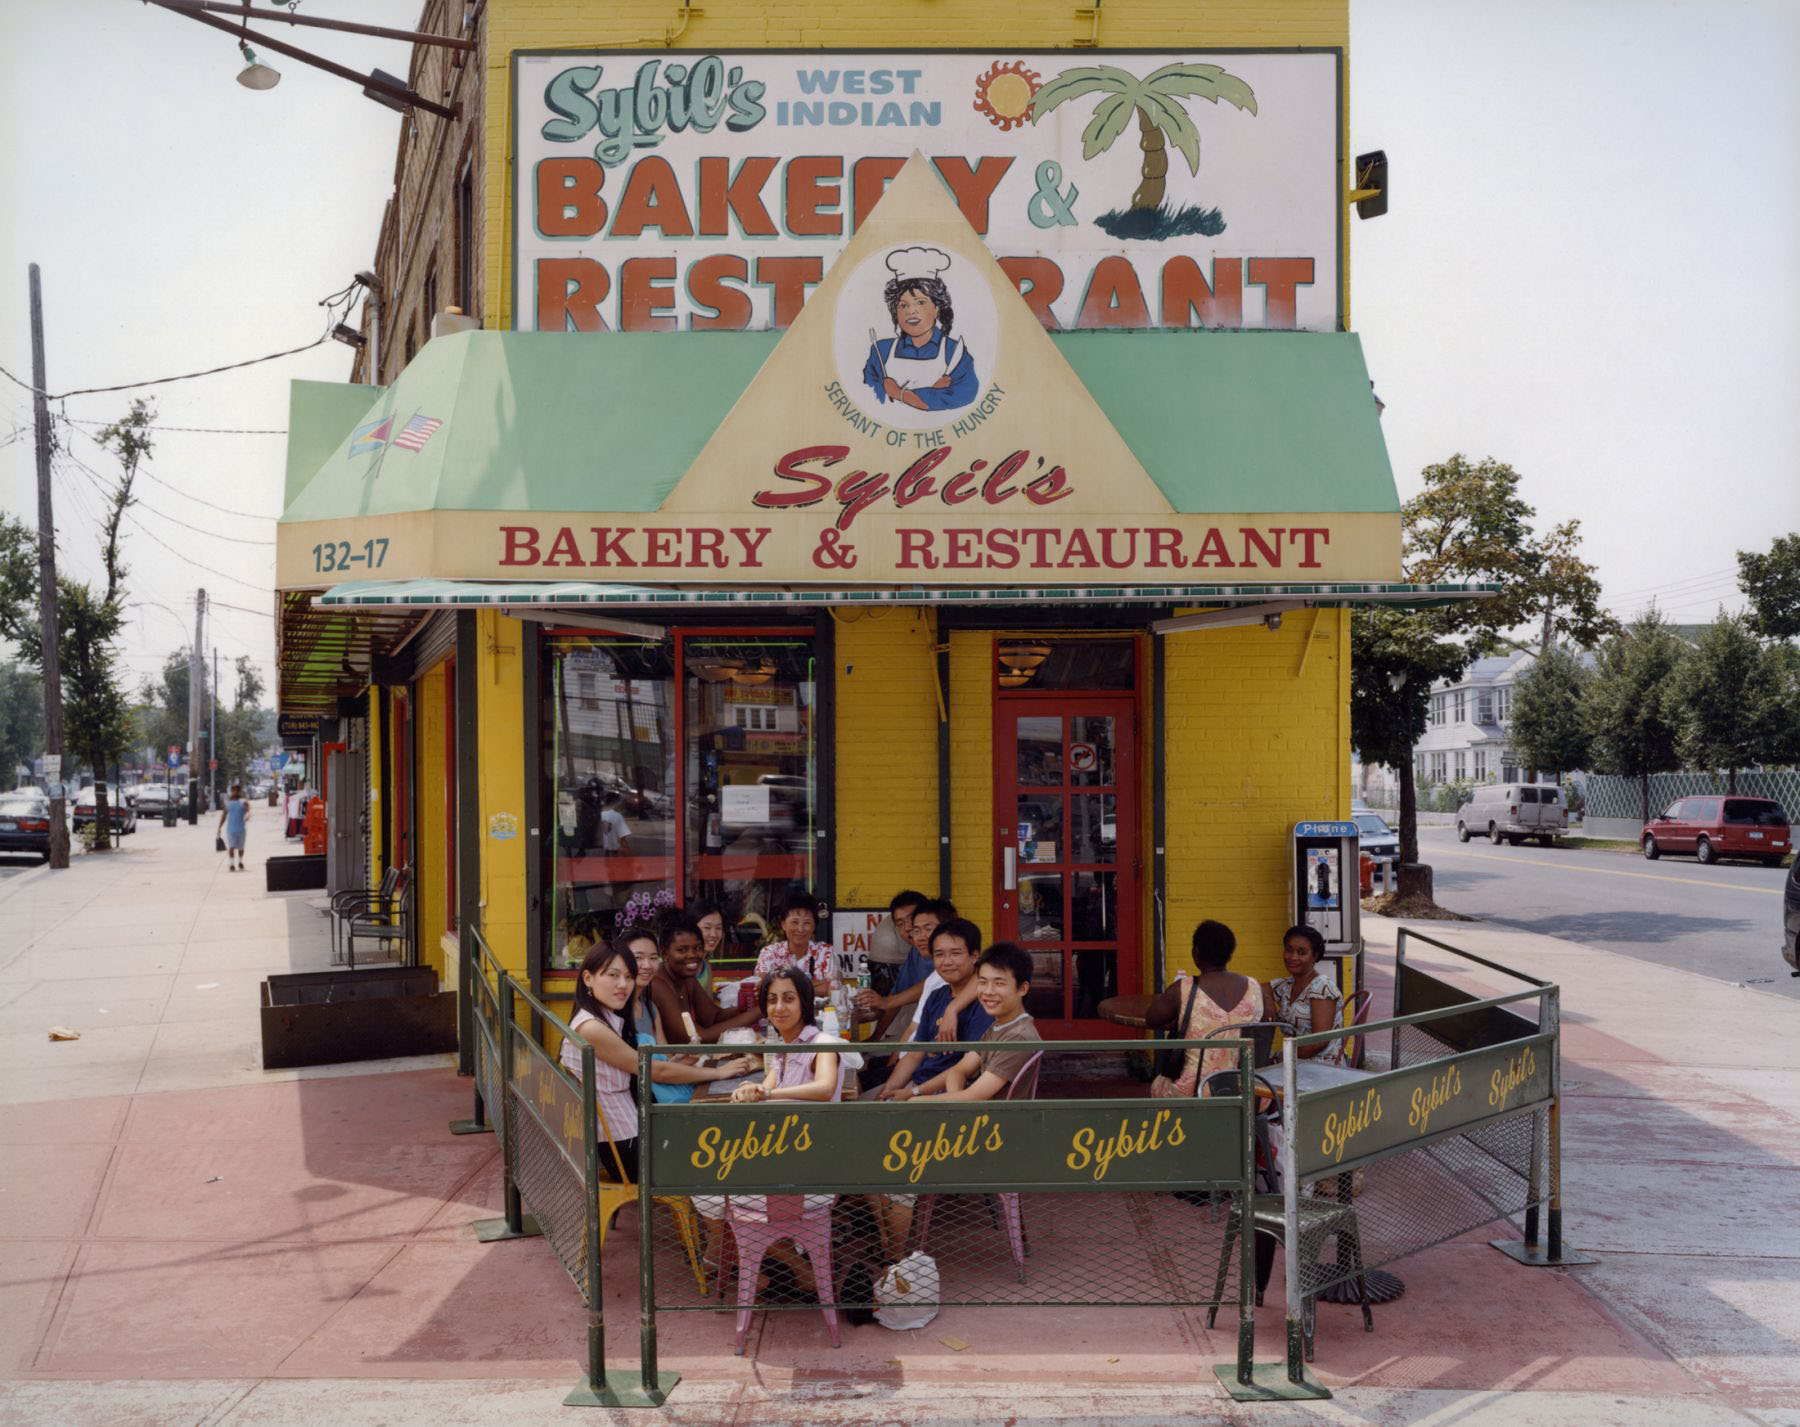 Sybil's West Indian Bakery and Restaurant , 132-17 Liberty Avenue, Queens , July 2003